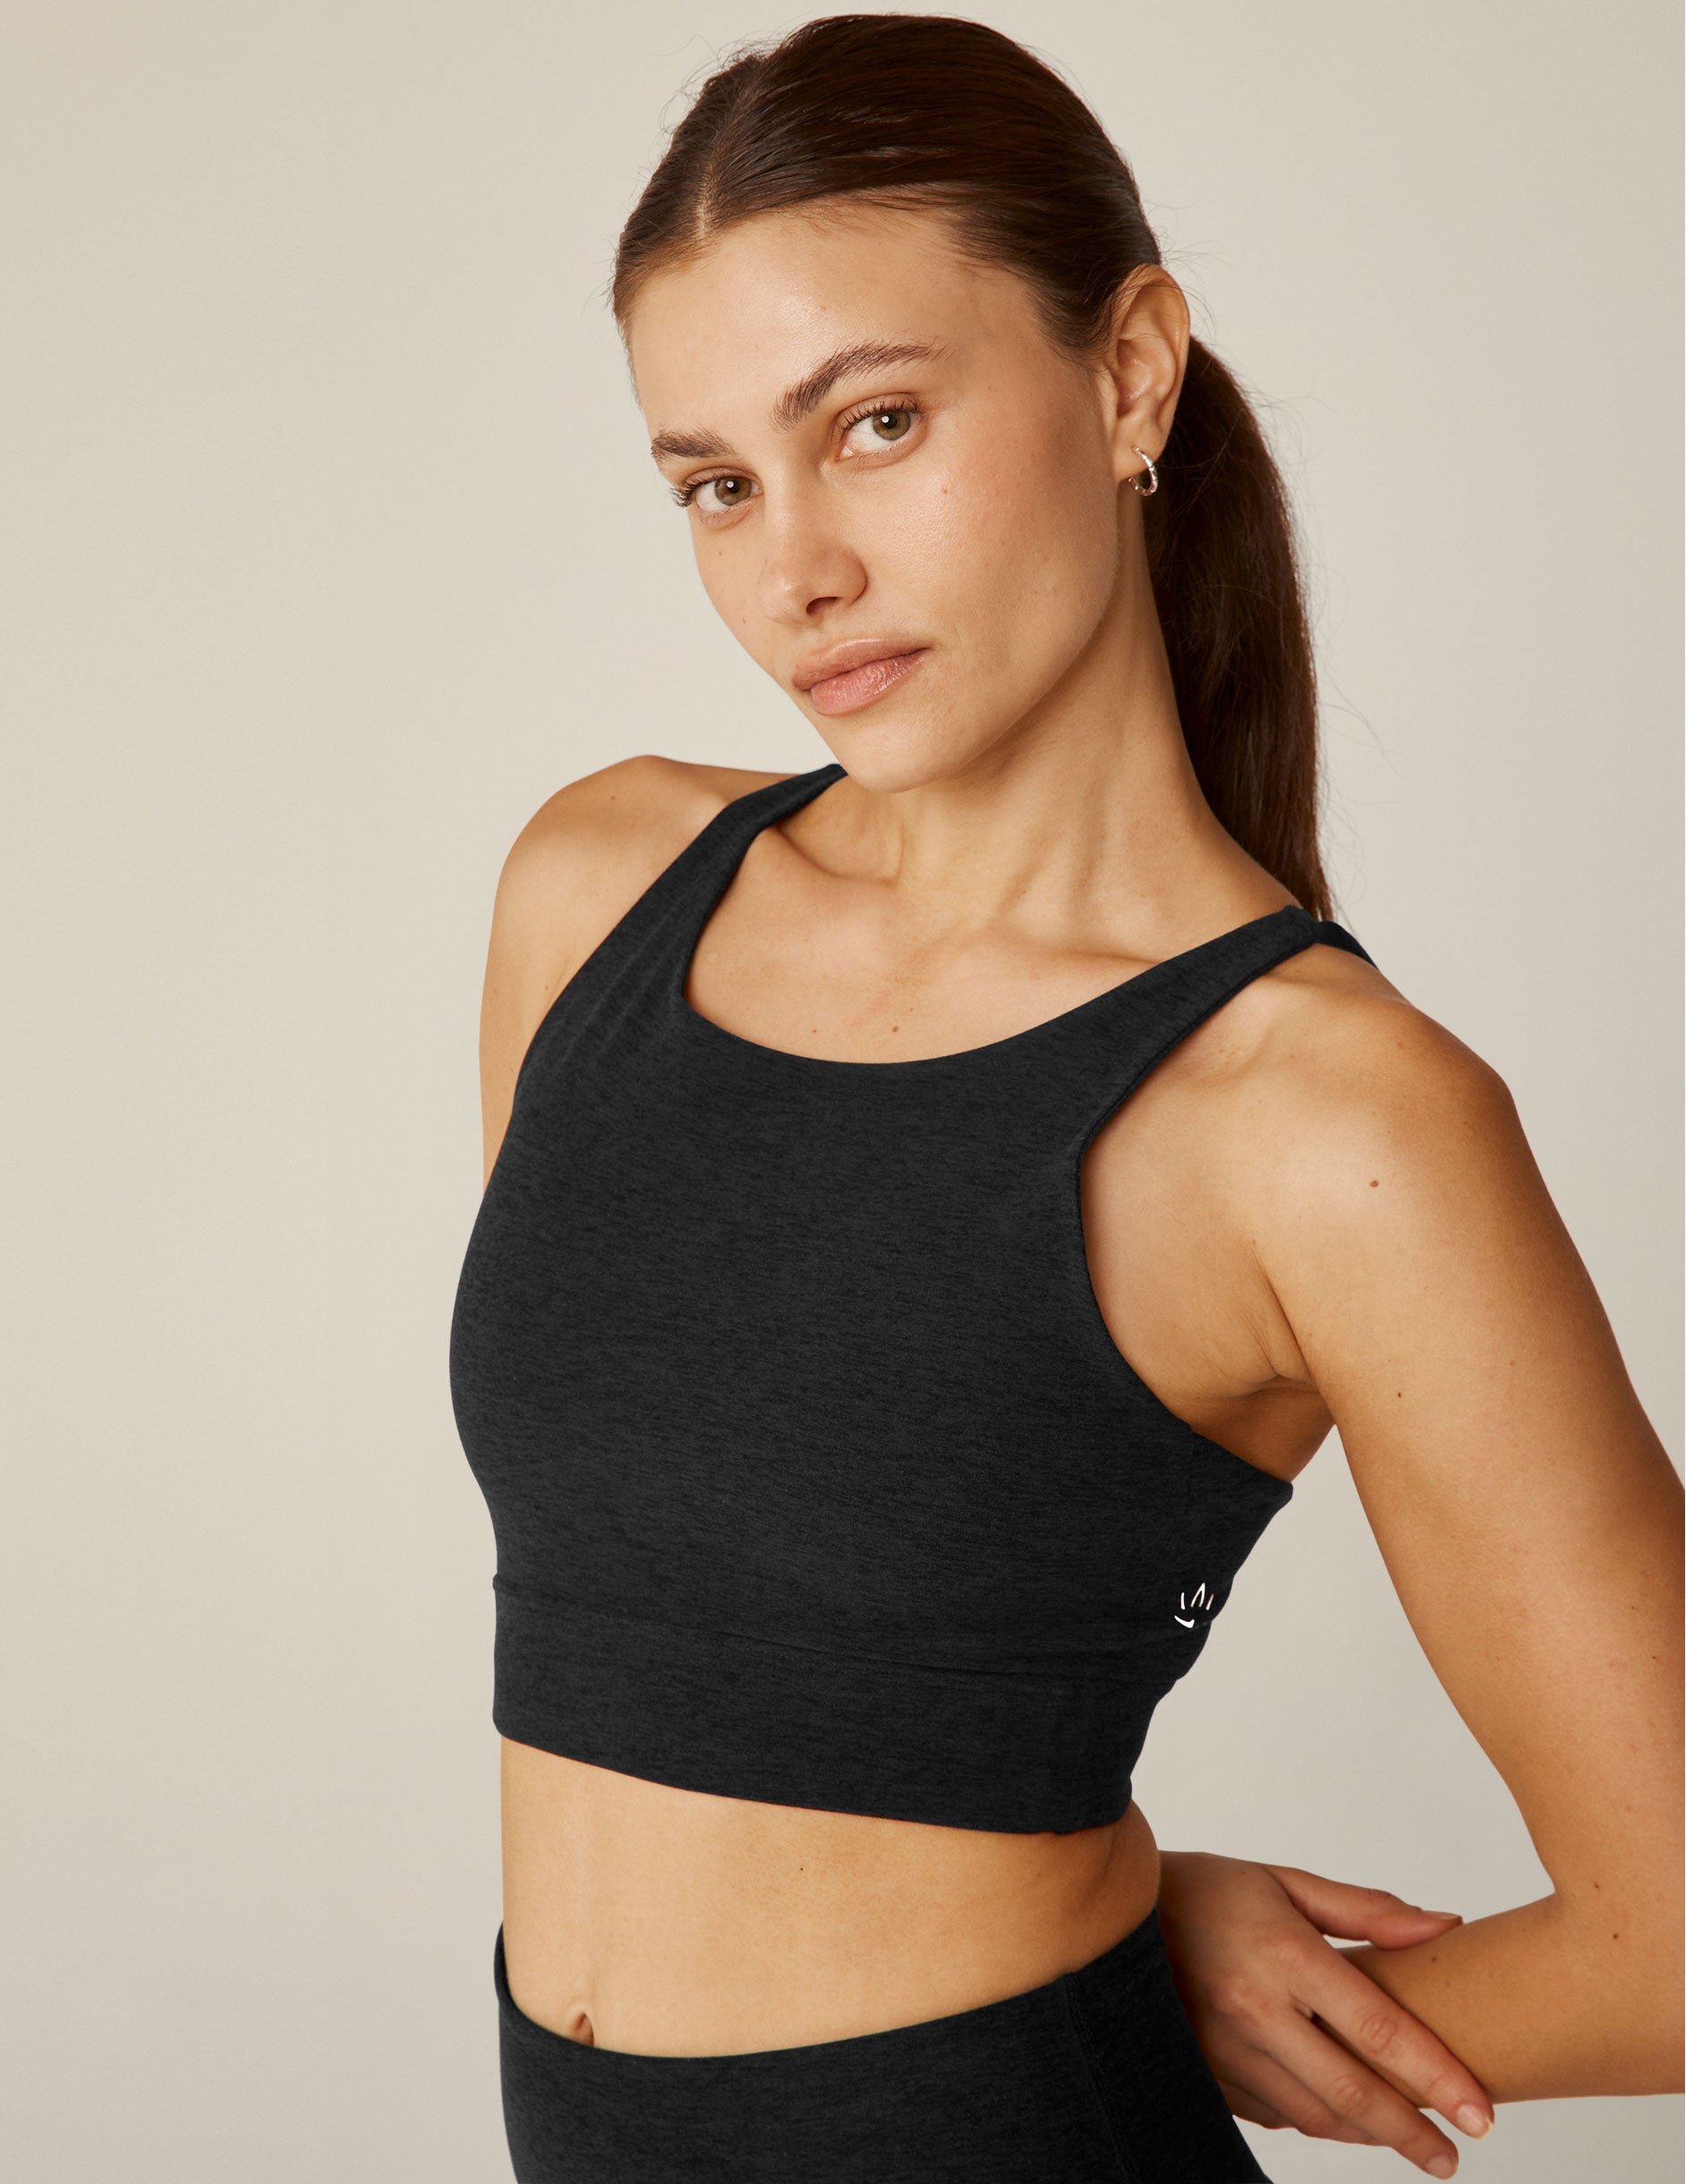 black bra top with an open back, strap detail.